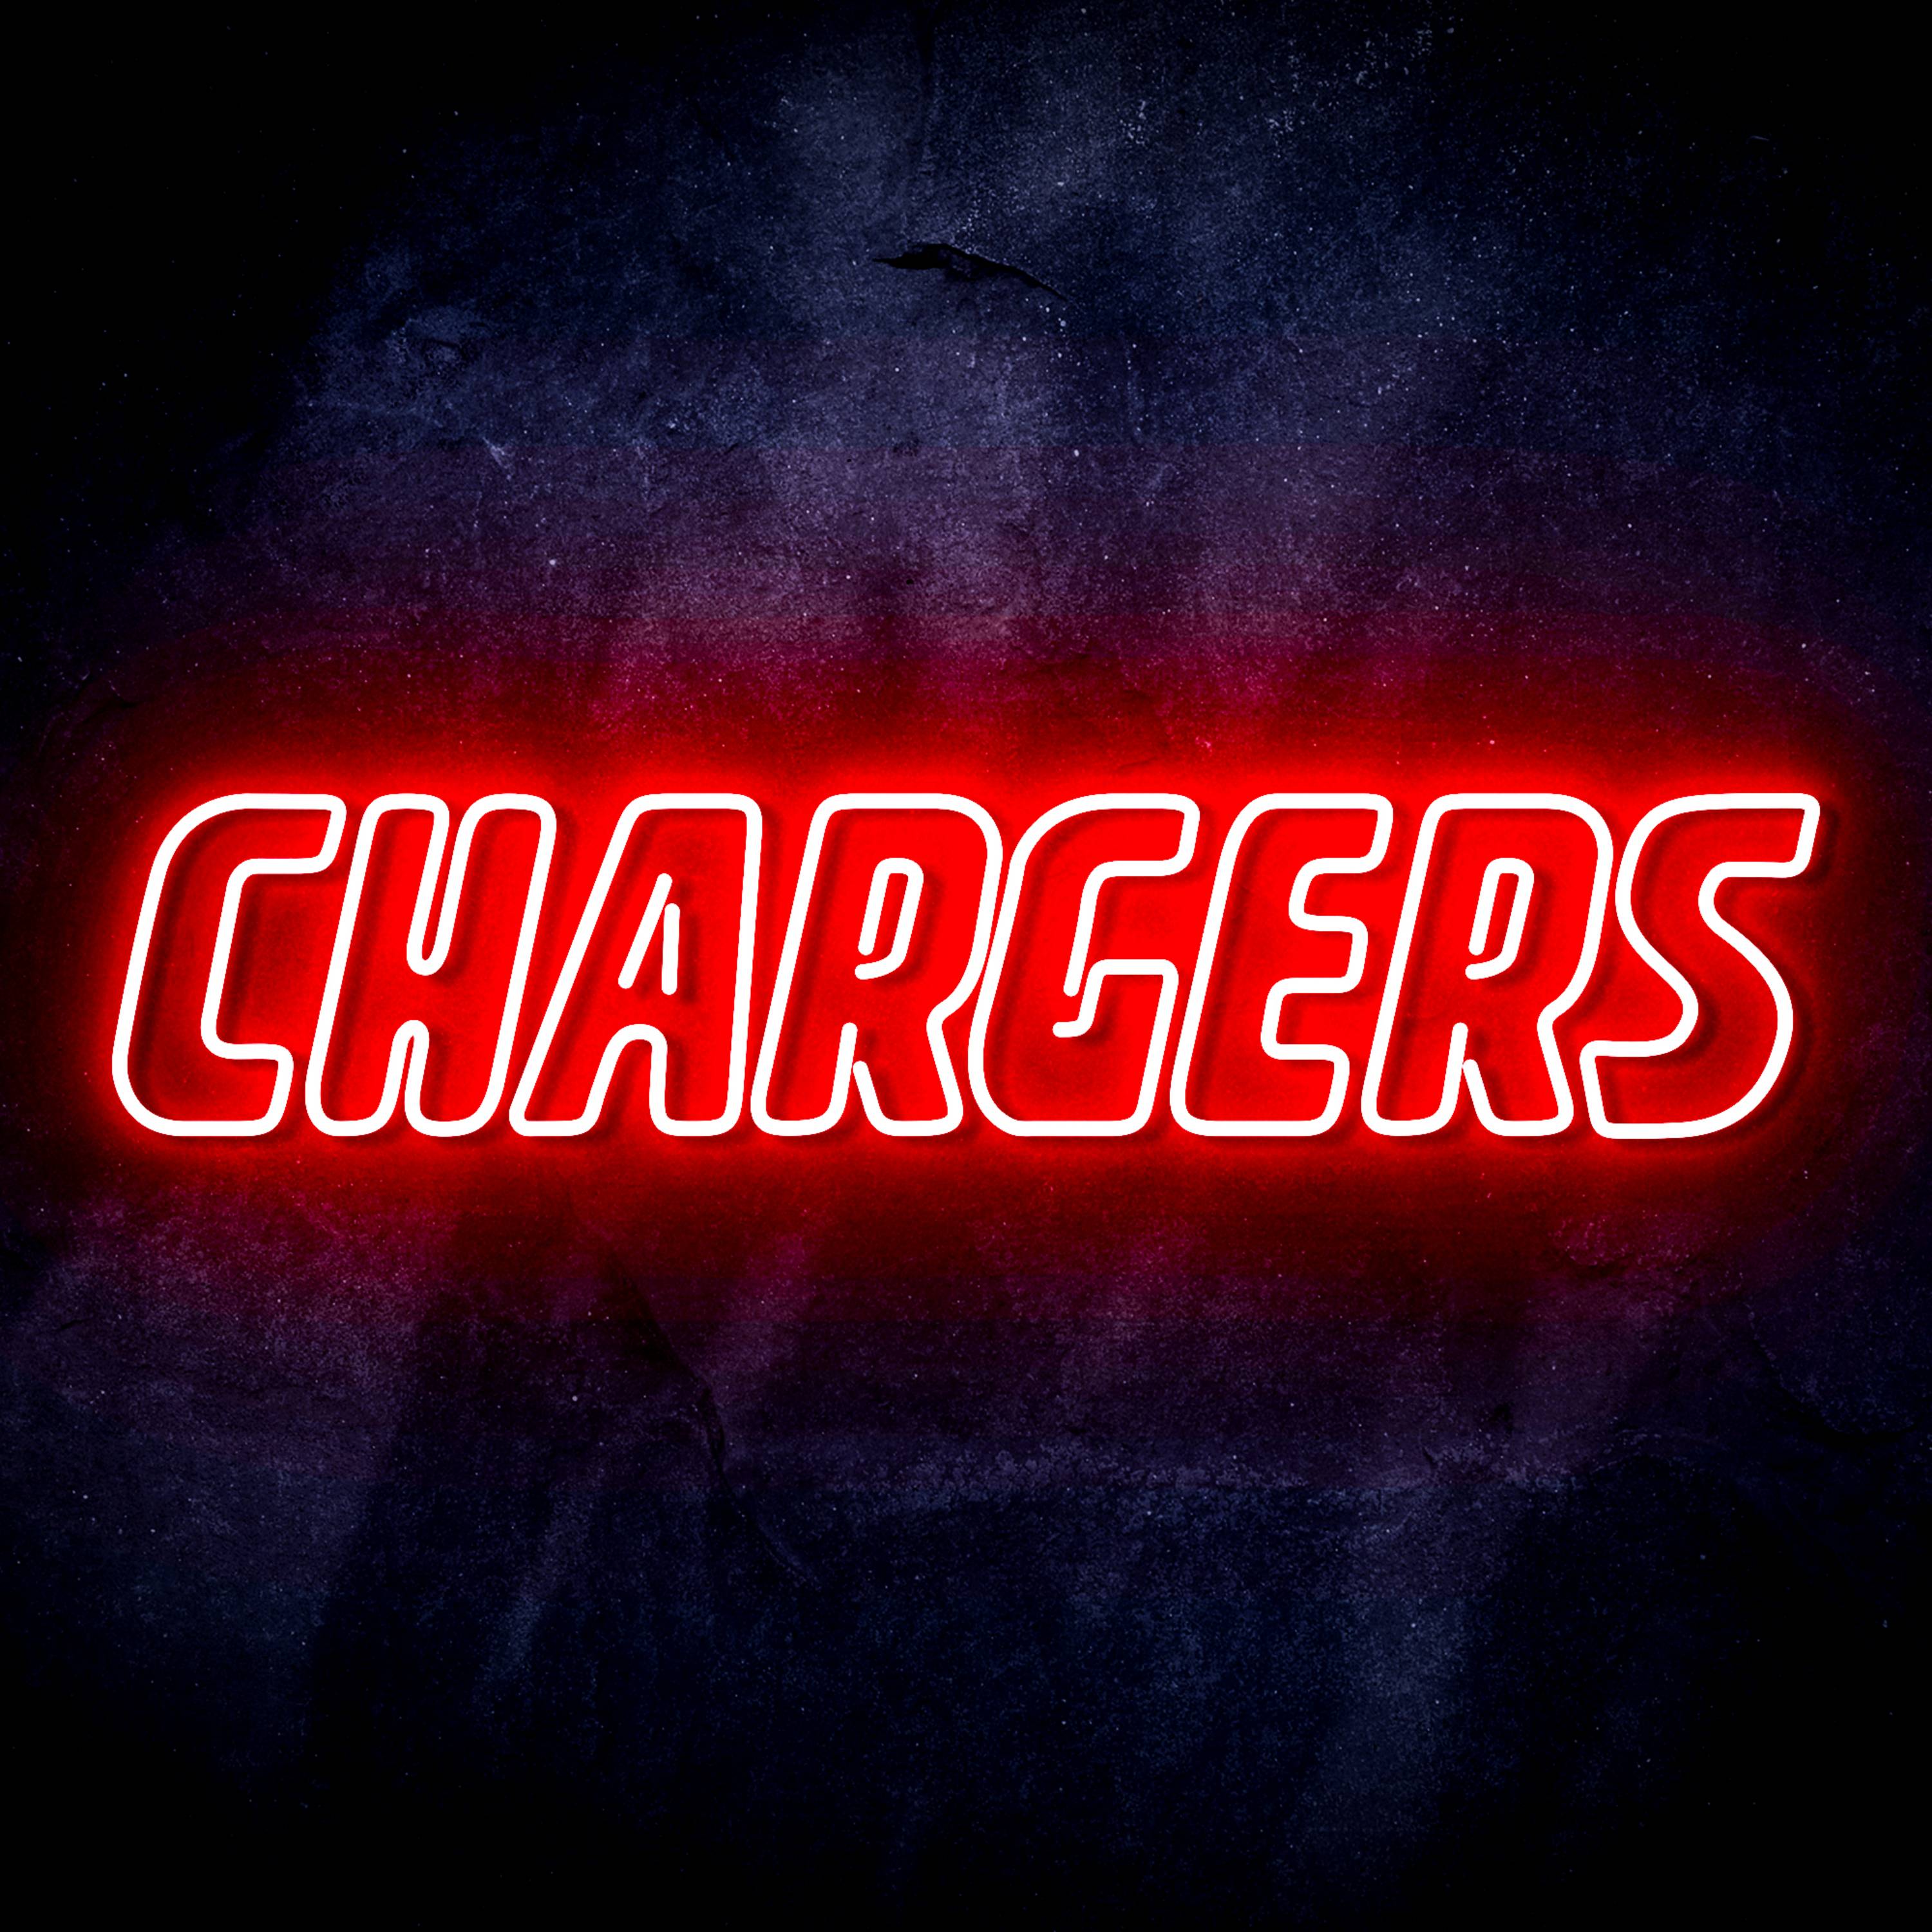 NFL CHARGERS LED Neon Sign